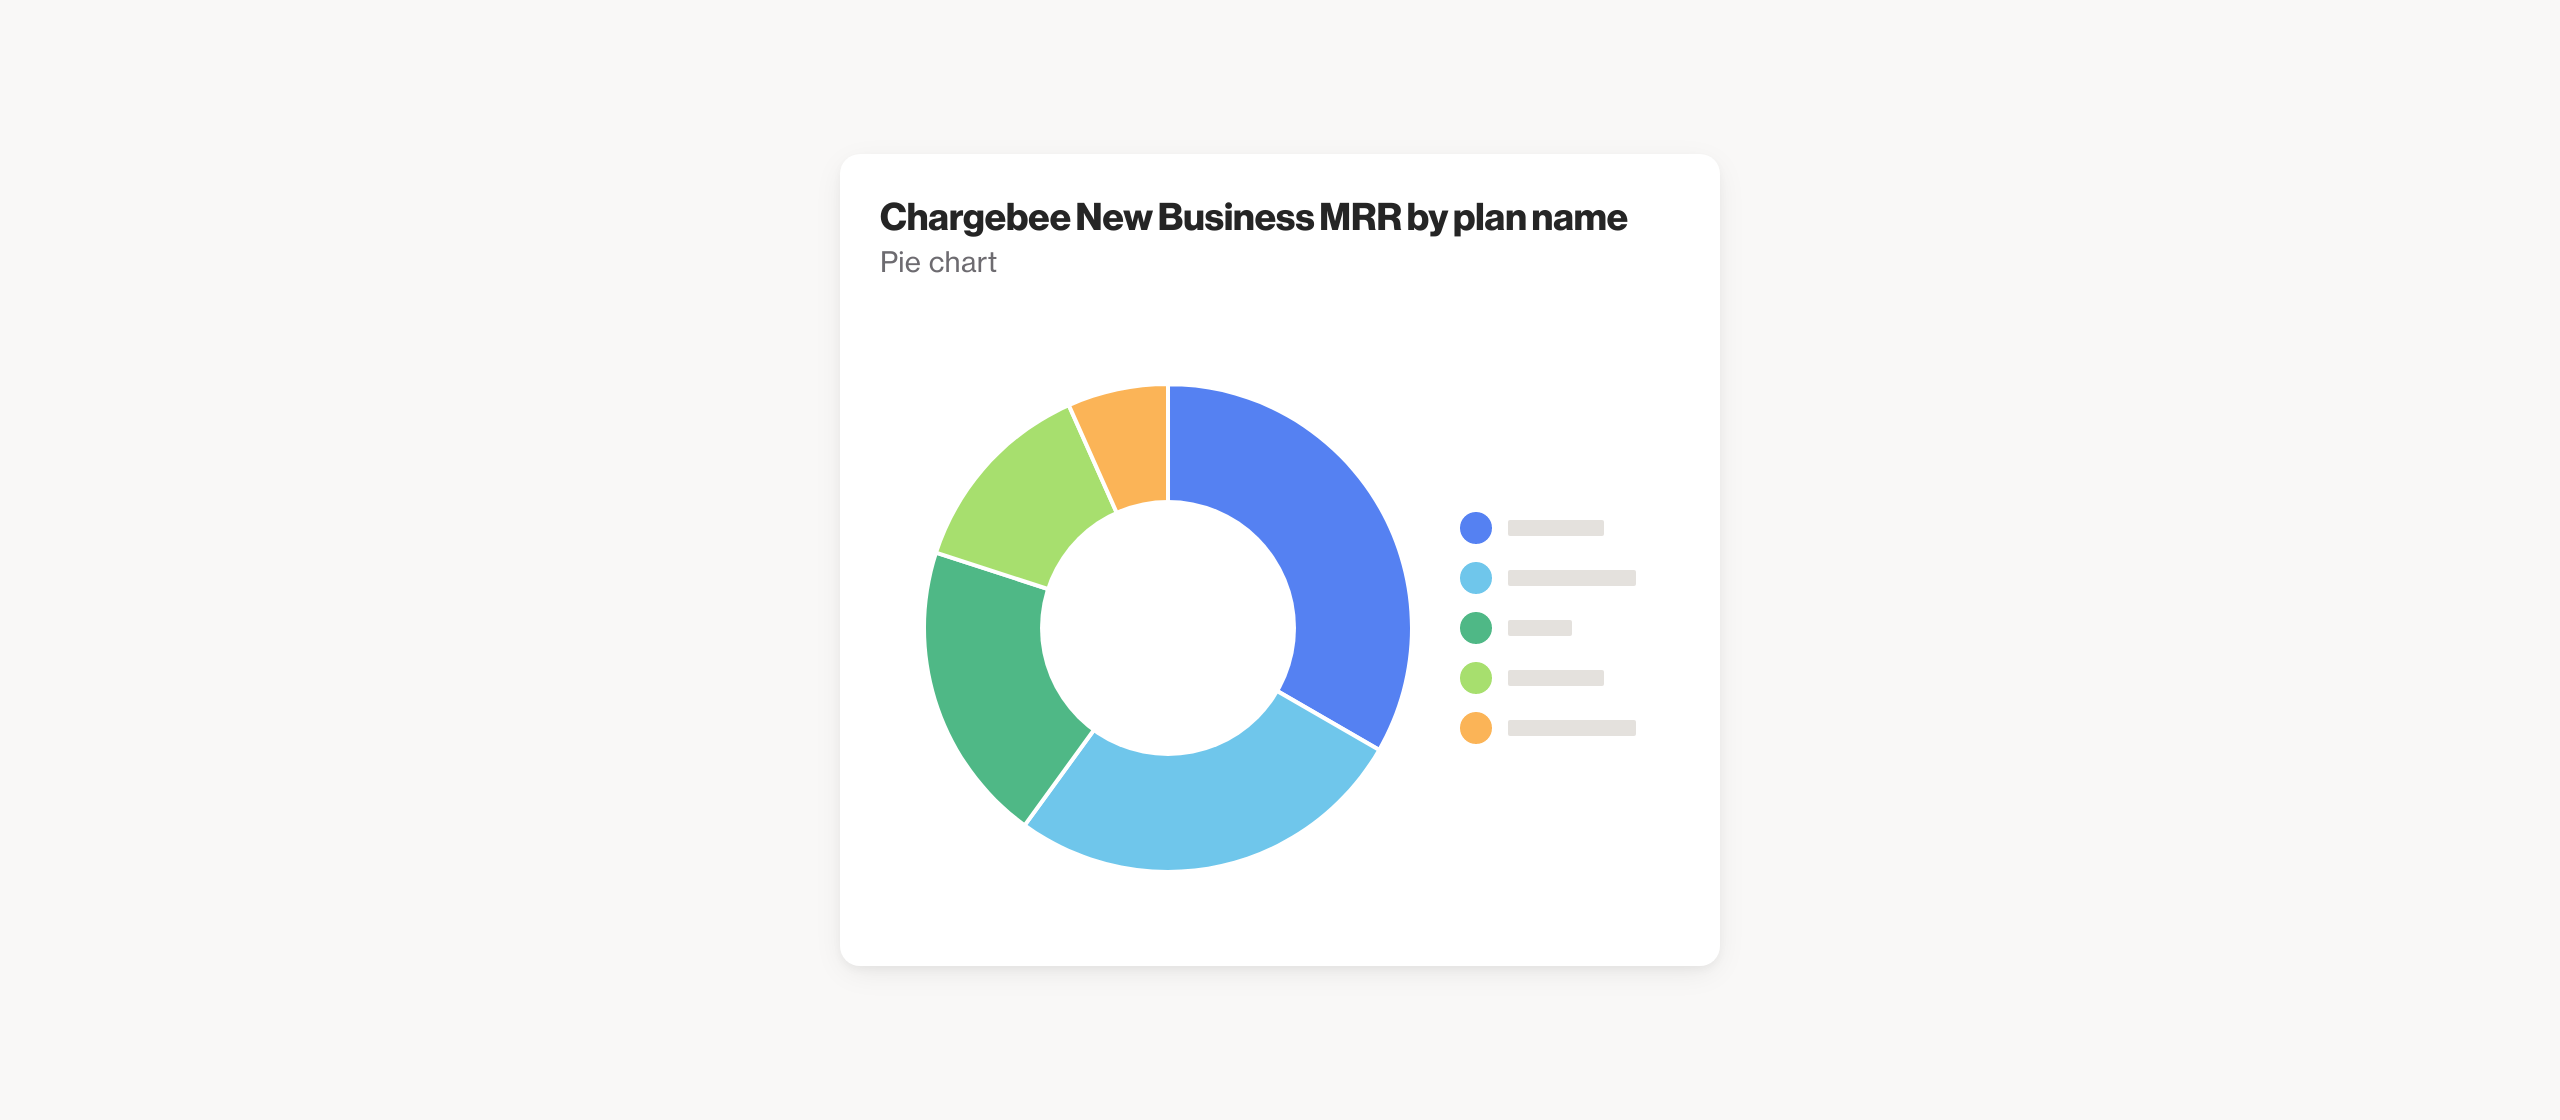 Chargebee New Business MRR by plan name